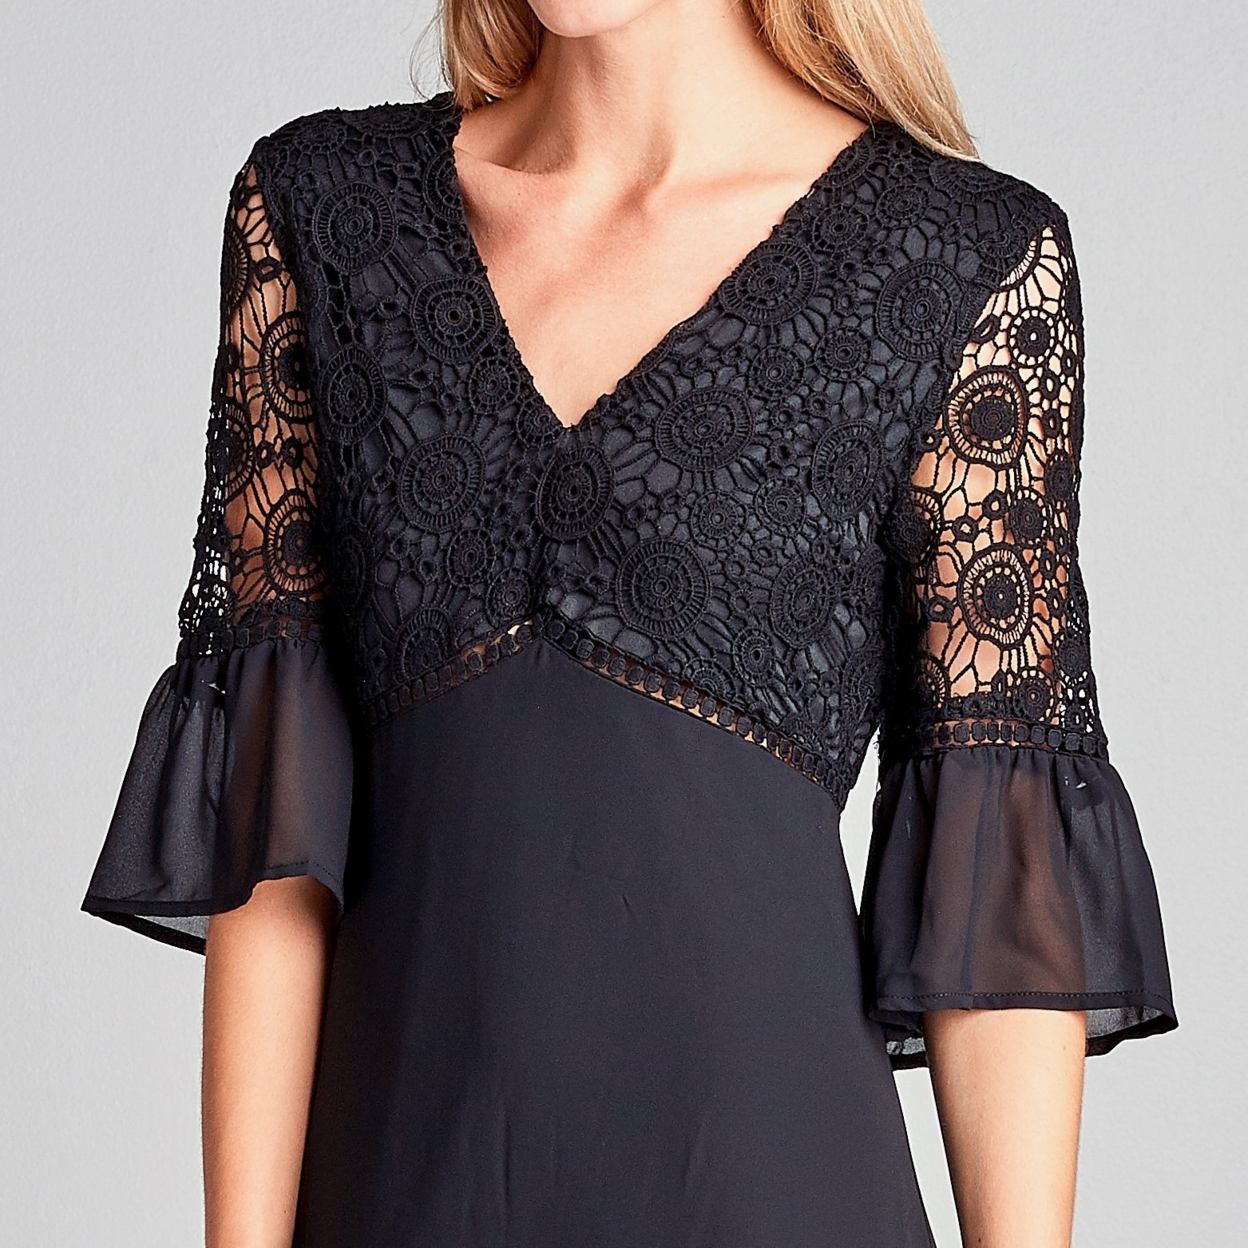 Bell Sleeve Medallion Lace Dress - Black, Small (0-4)